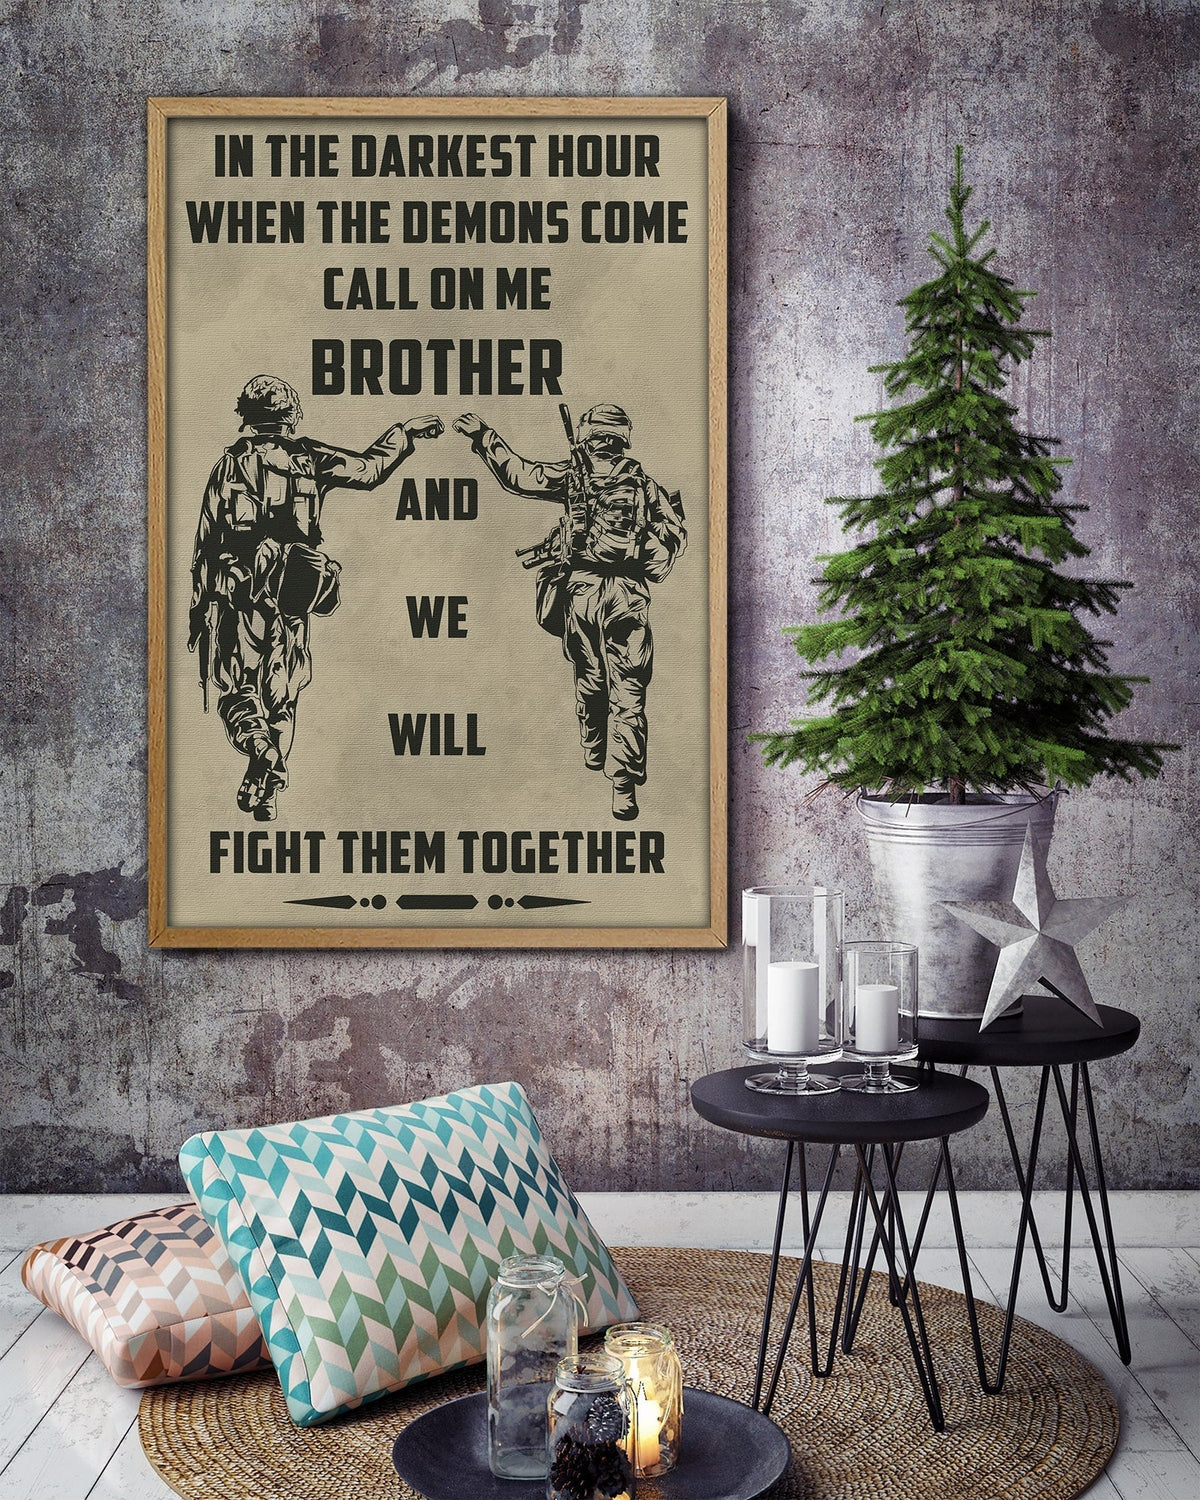 SD029 - Call On Me Brother - Soldier - English - Vertical Poster - Vertical Canvas - Soldier Poster